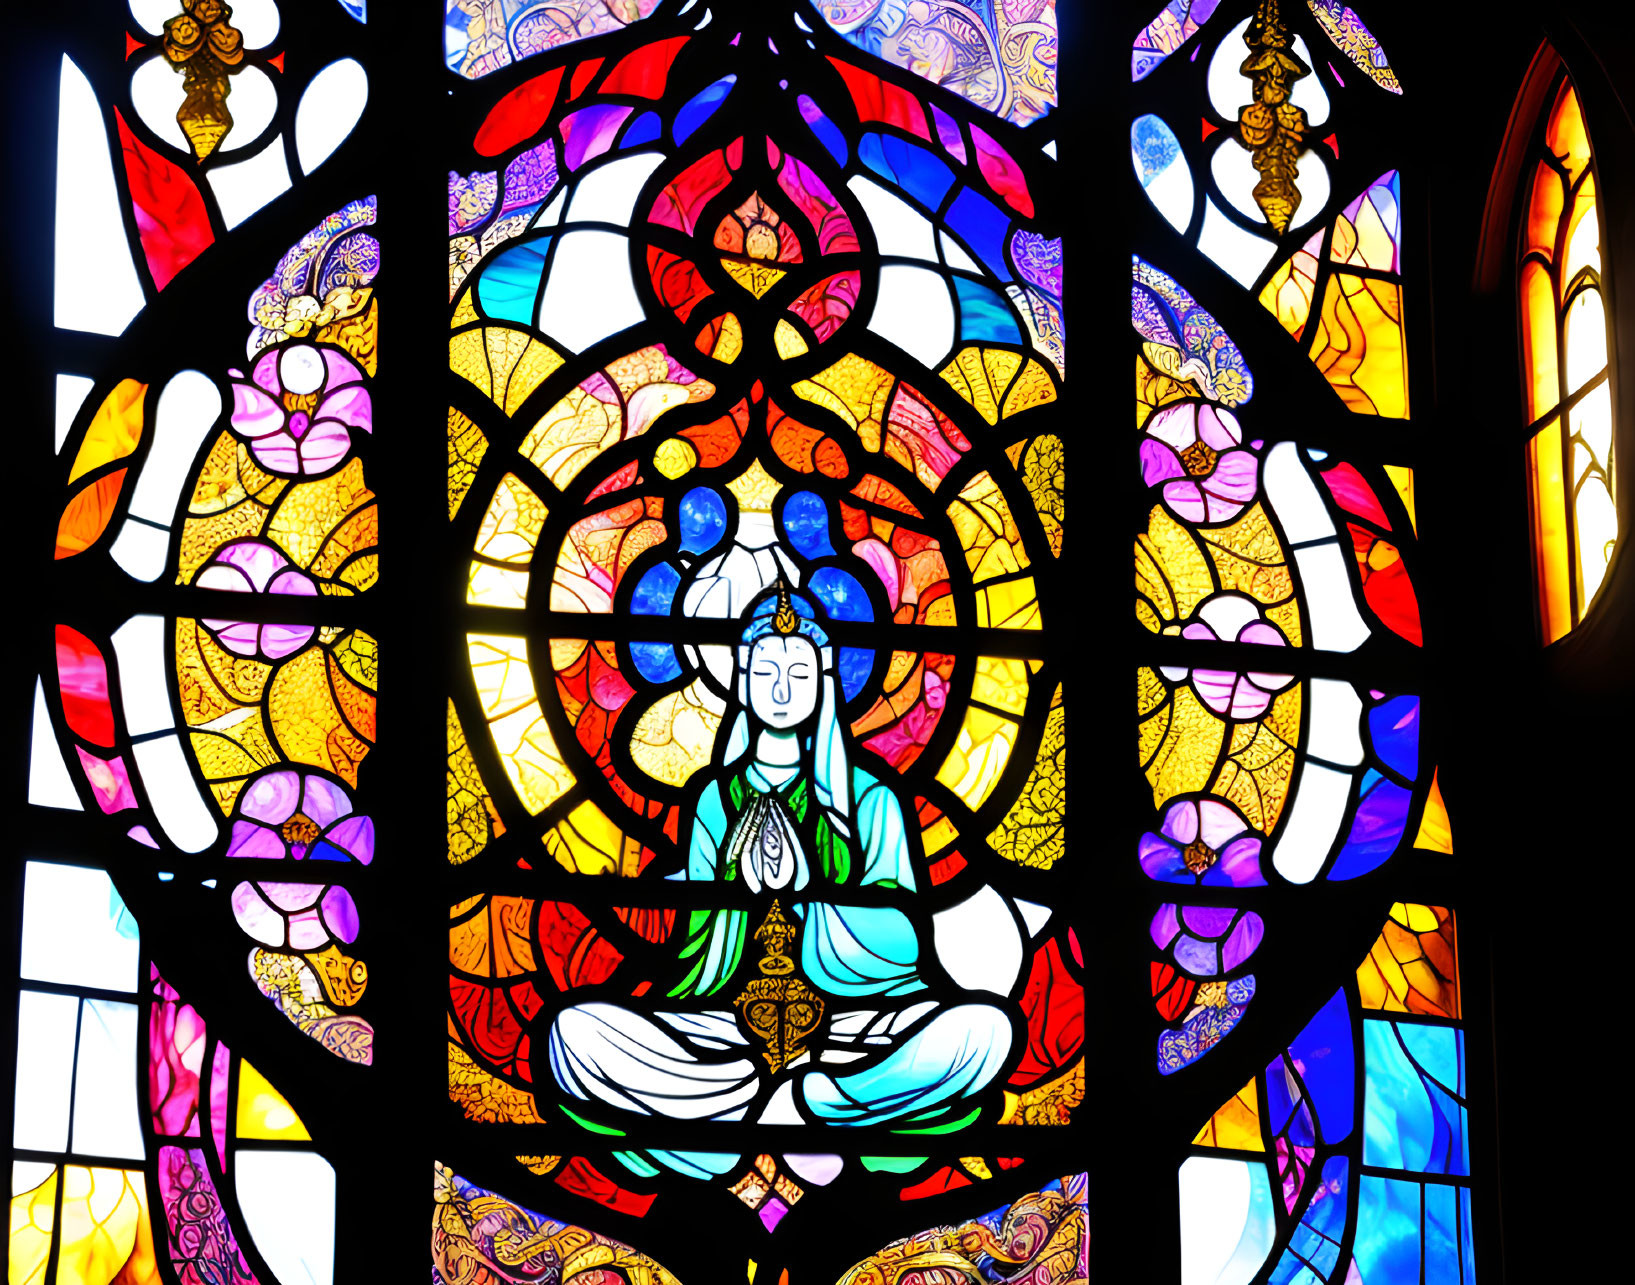 Vibrant stained glass window featuring serene deity and intricate patterns